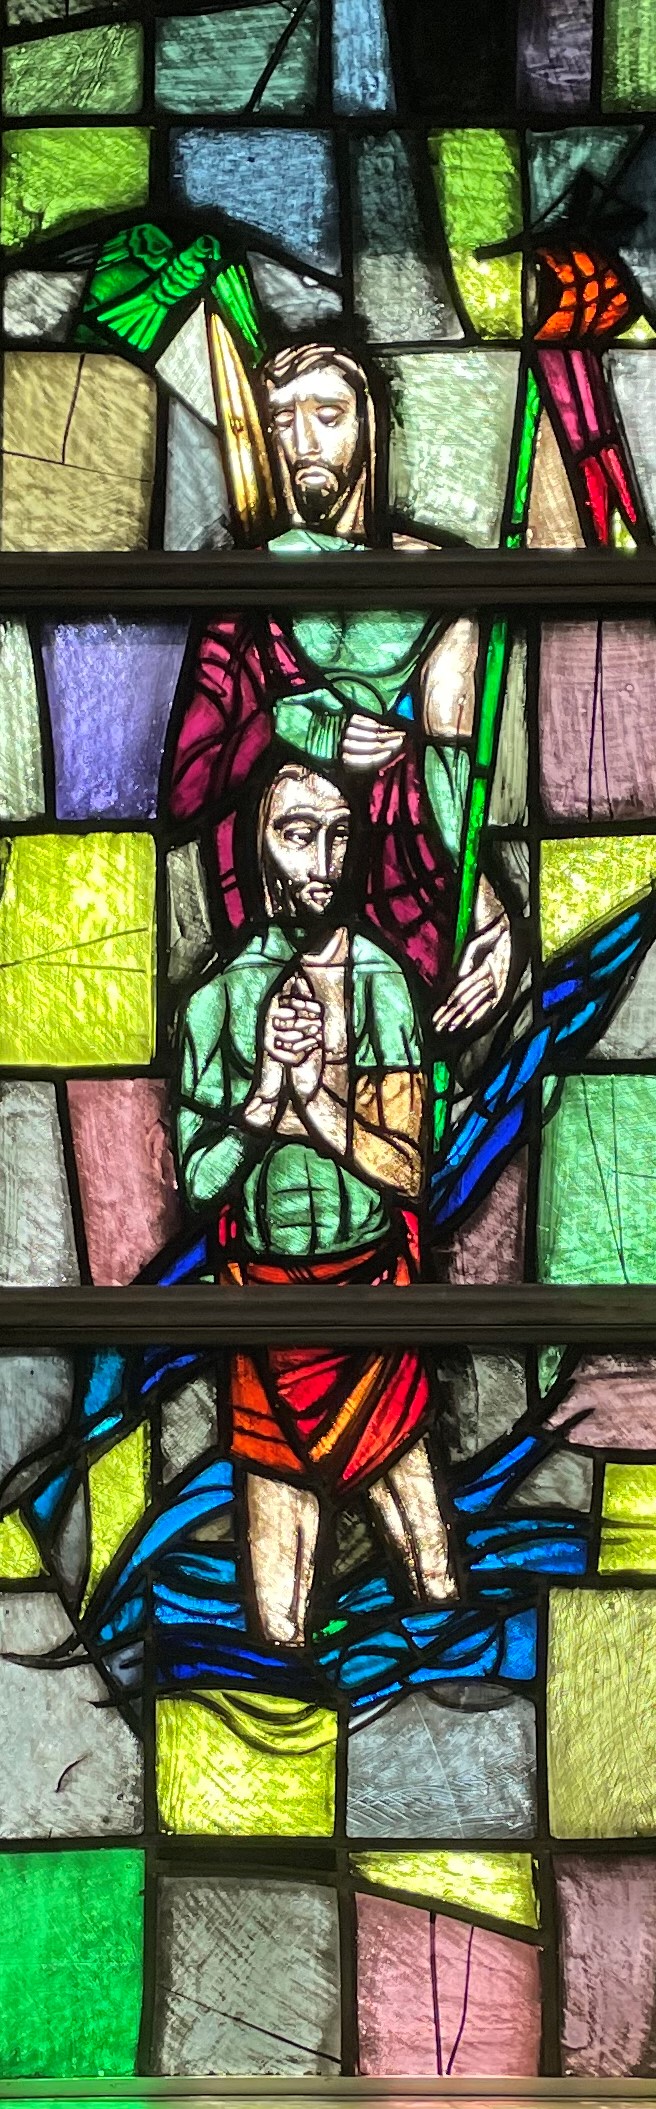 Picture of stained glass window showing the baptism of Jesus